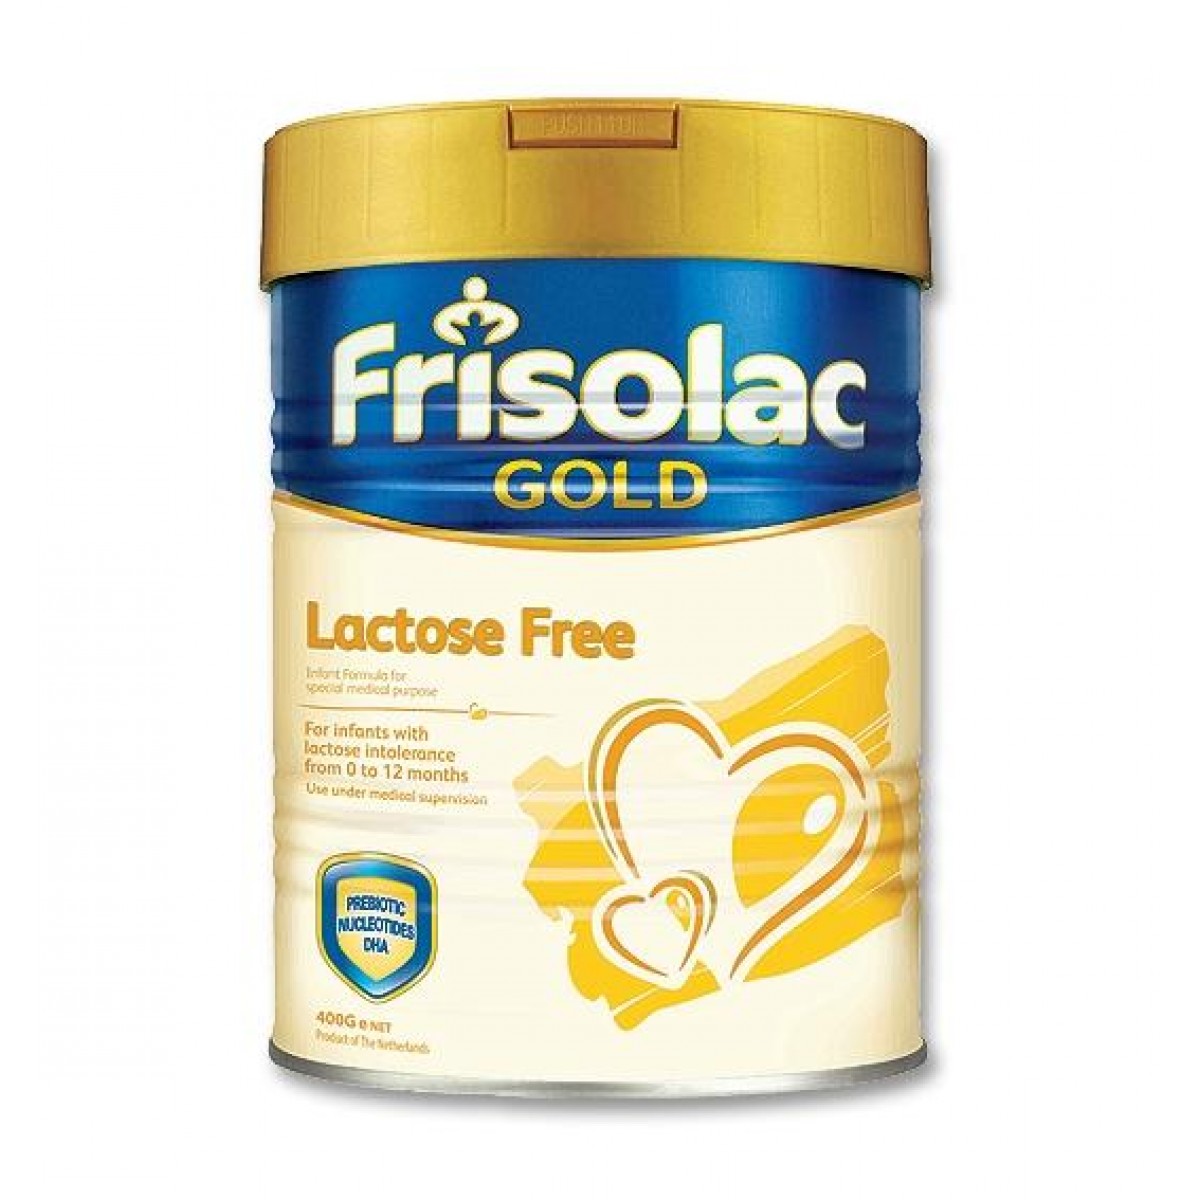 Frisolac-Gold-Lactose-Free-4